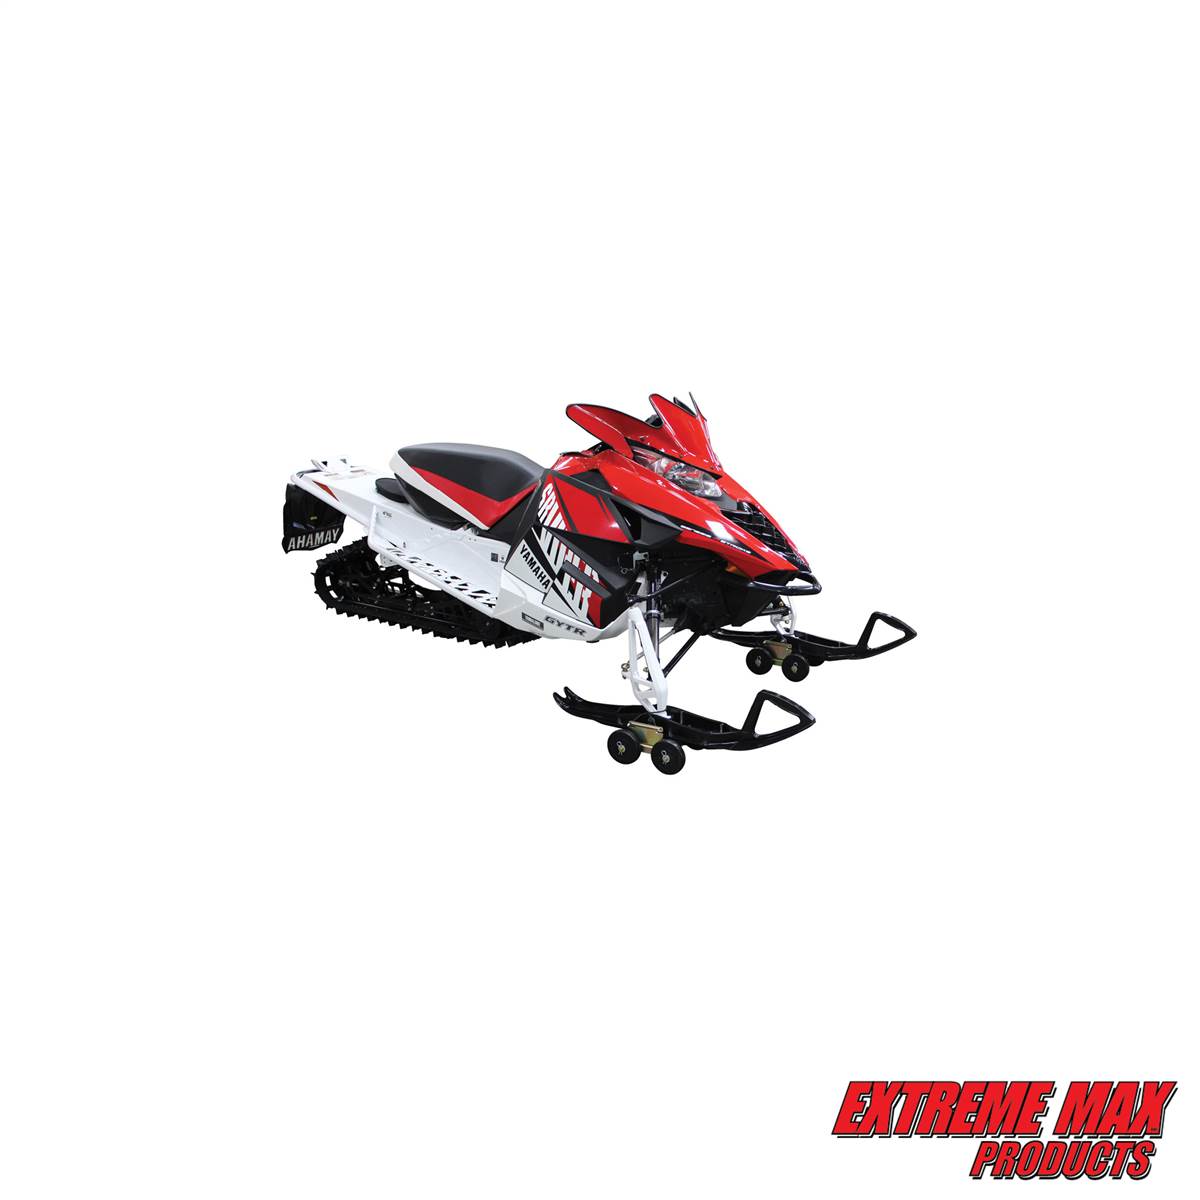 Standard Extreme Max 5800.0200 Power Wheels Driveable Steerable Snowmobile Dollies 